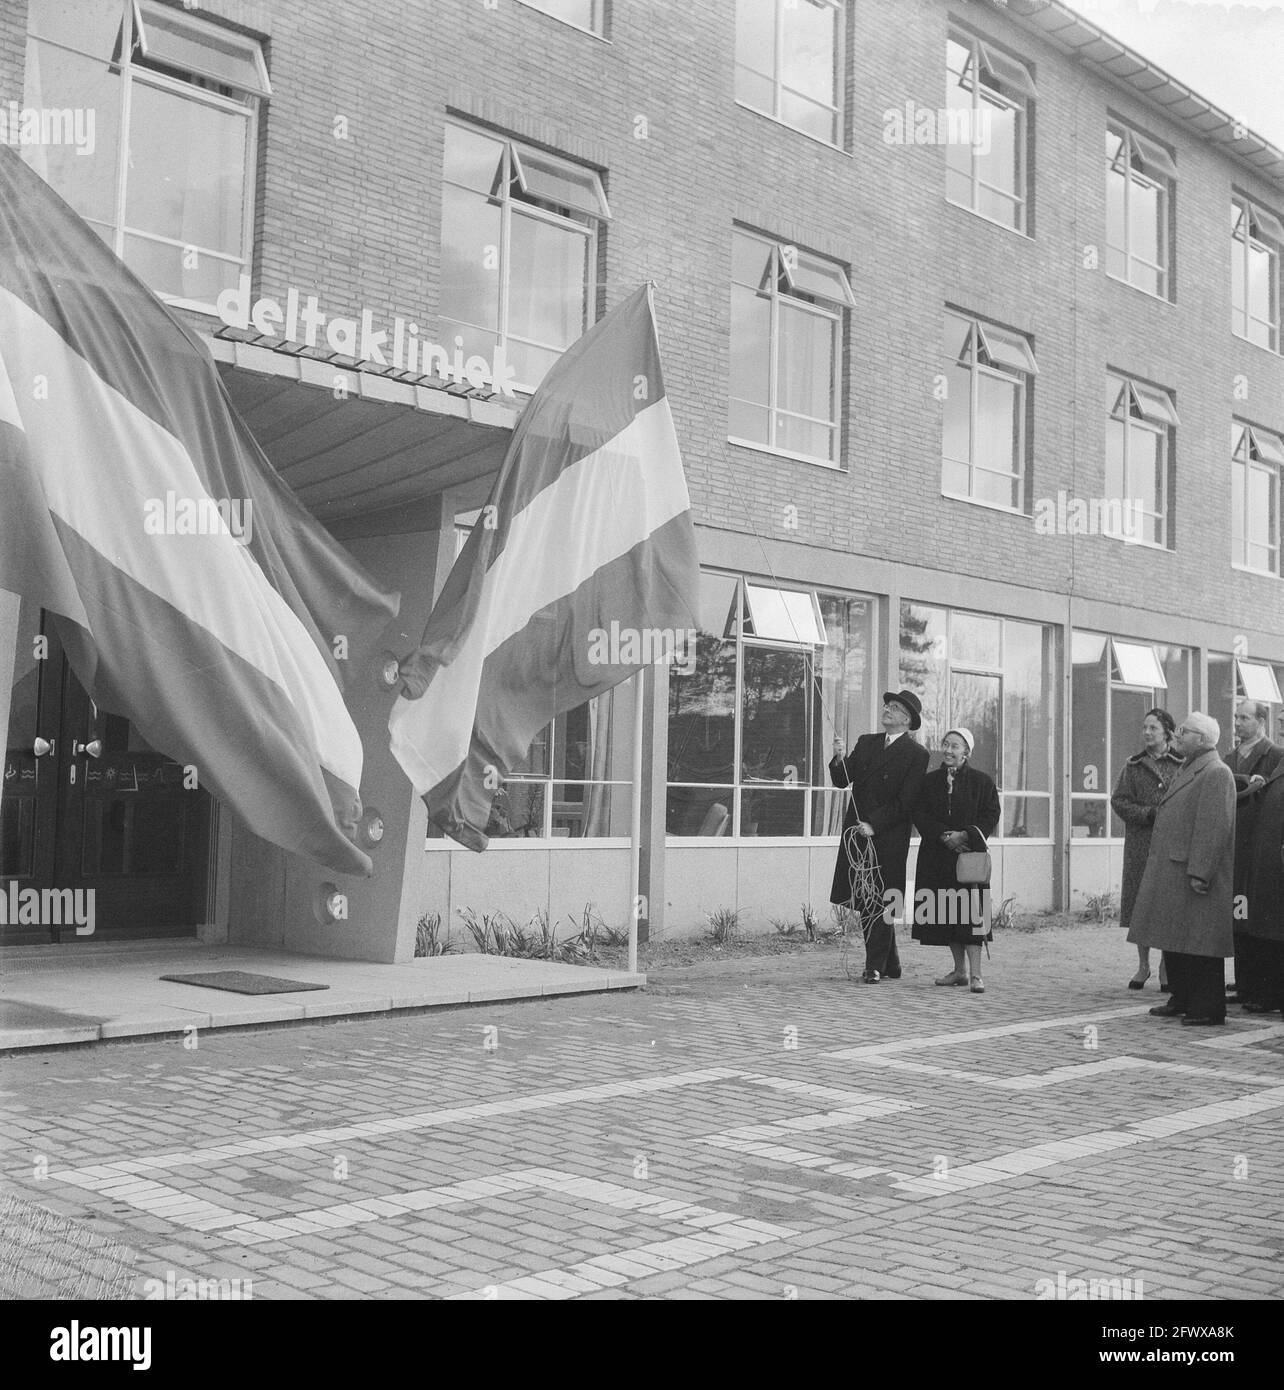 Opening Psychiatric Delta Clinic in Poortugaal, The Netherlands, April 2, 1958, Openings, The Netherlands, 20th century press agency photo, news to remember, documentary, historic photography 1945-1990, visual stories, human history of the Twentieth Century, capturing moments in time Stock Photo